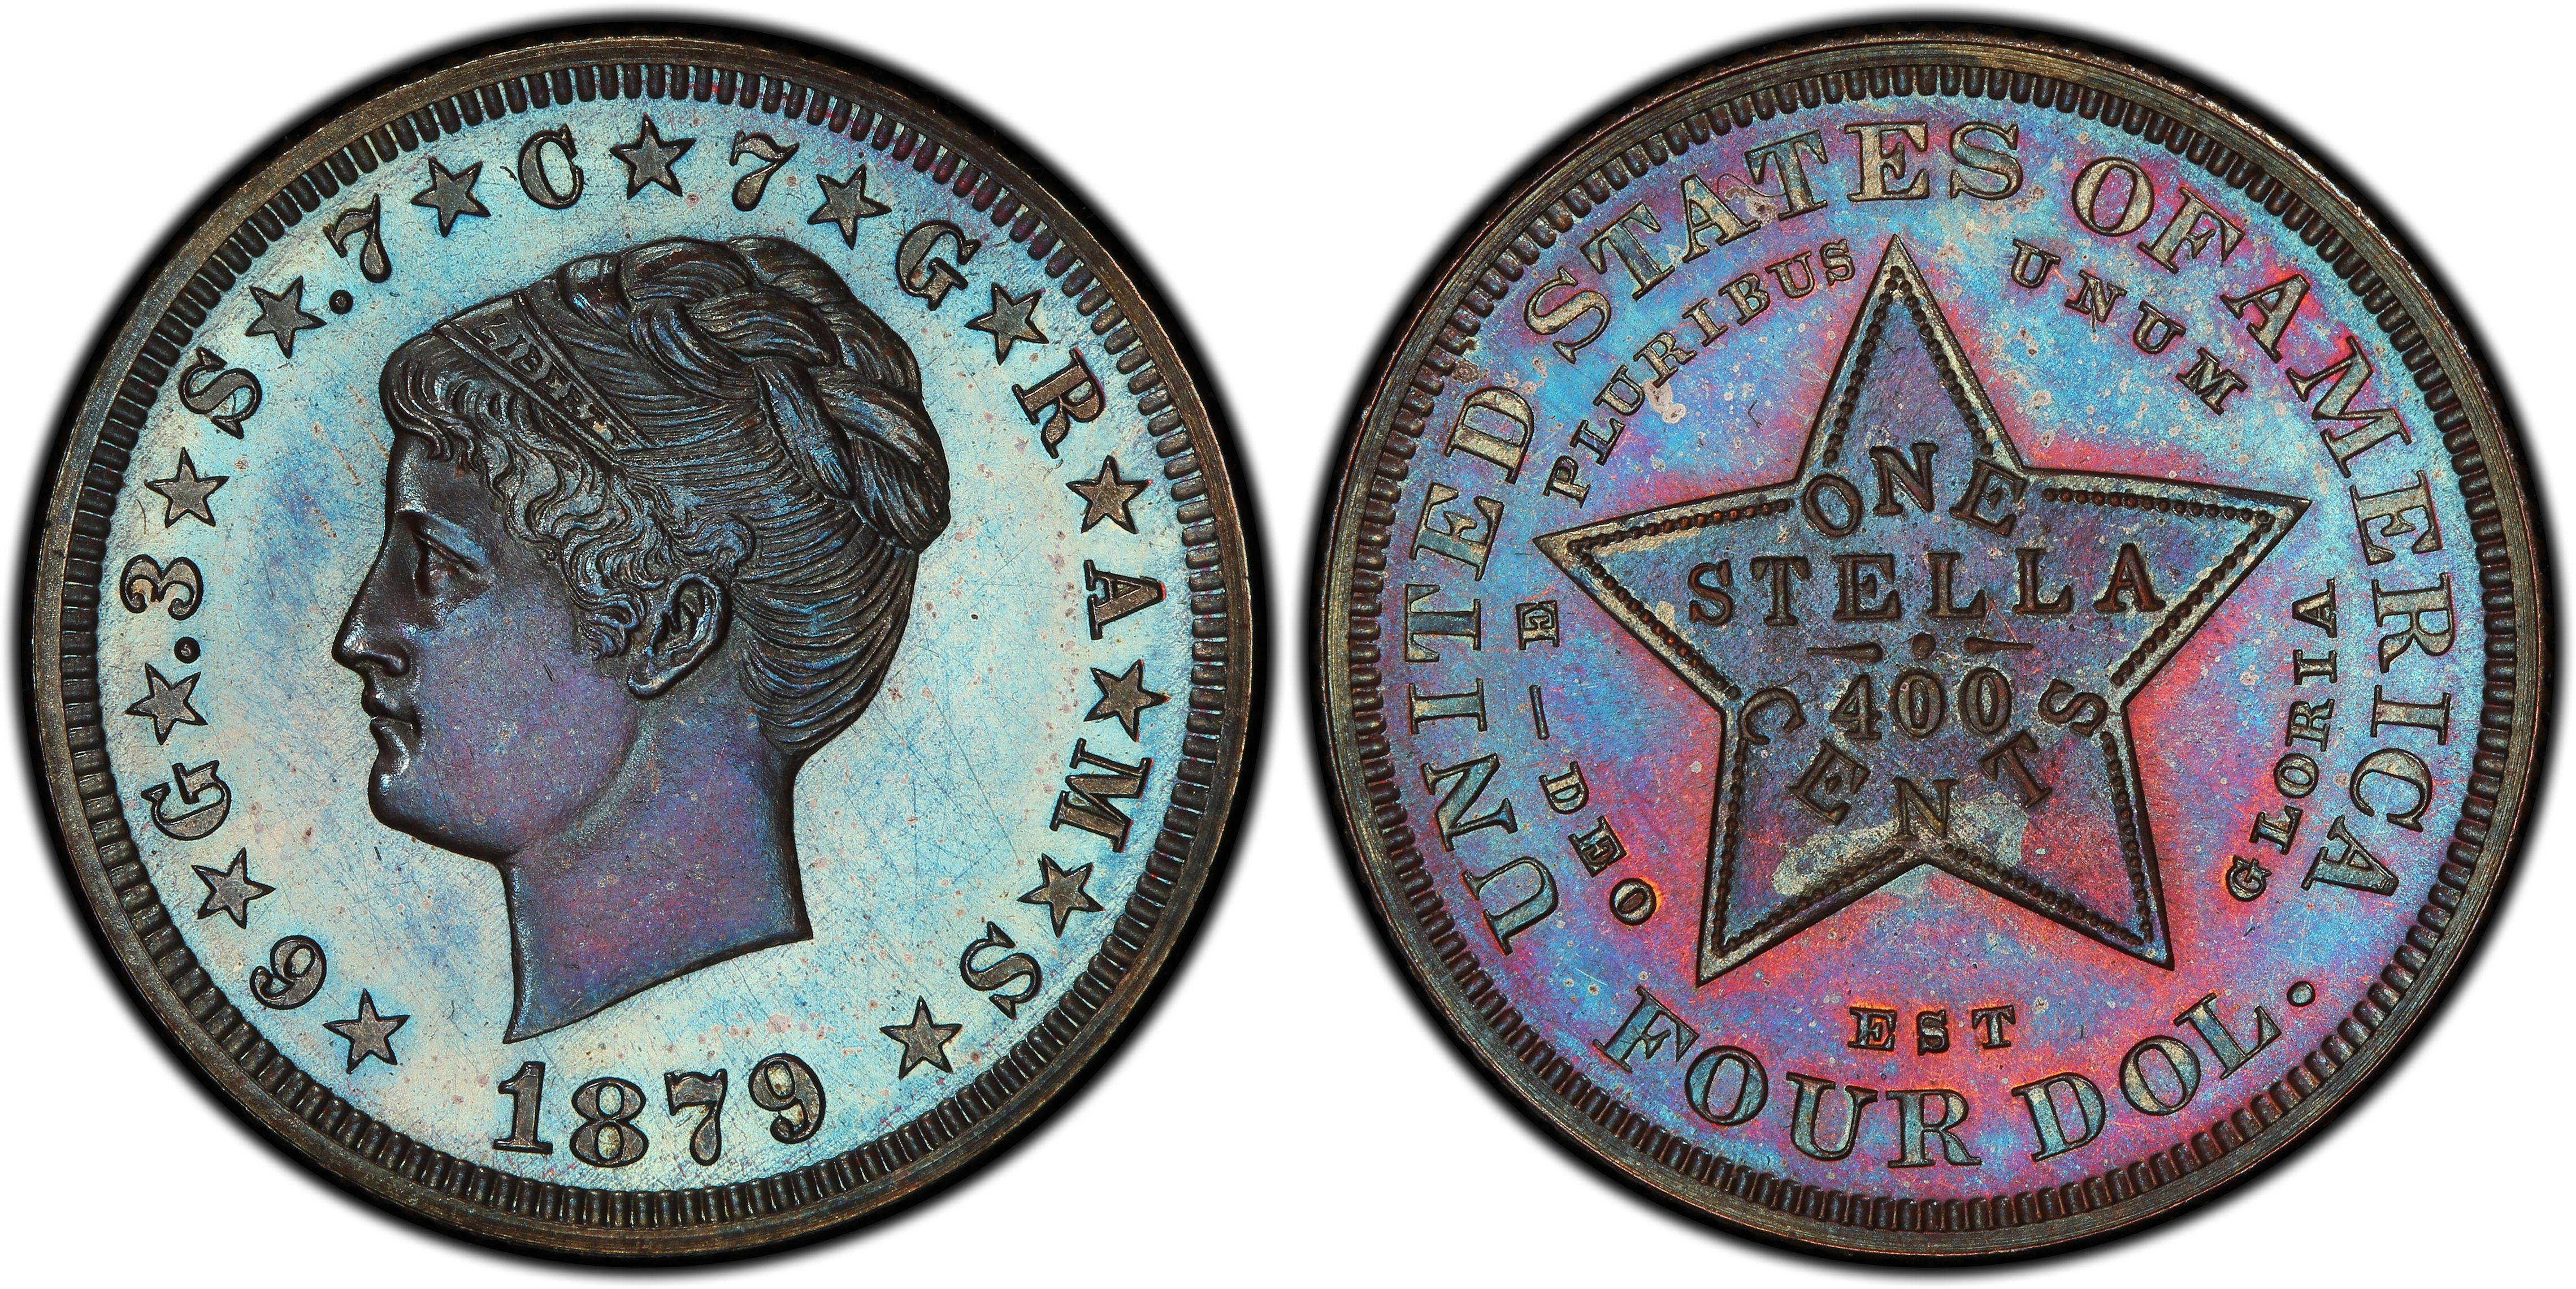 $4 Stella - PCGS CoinFacts